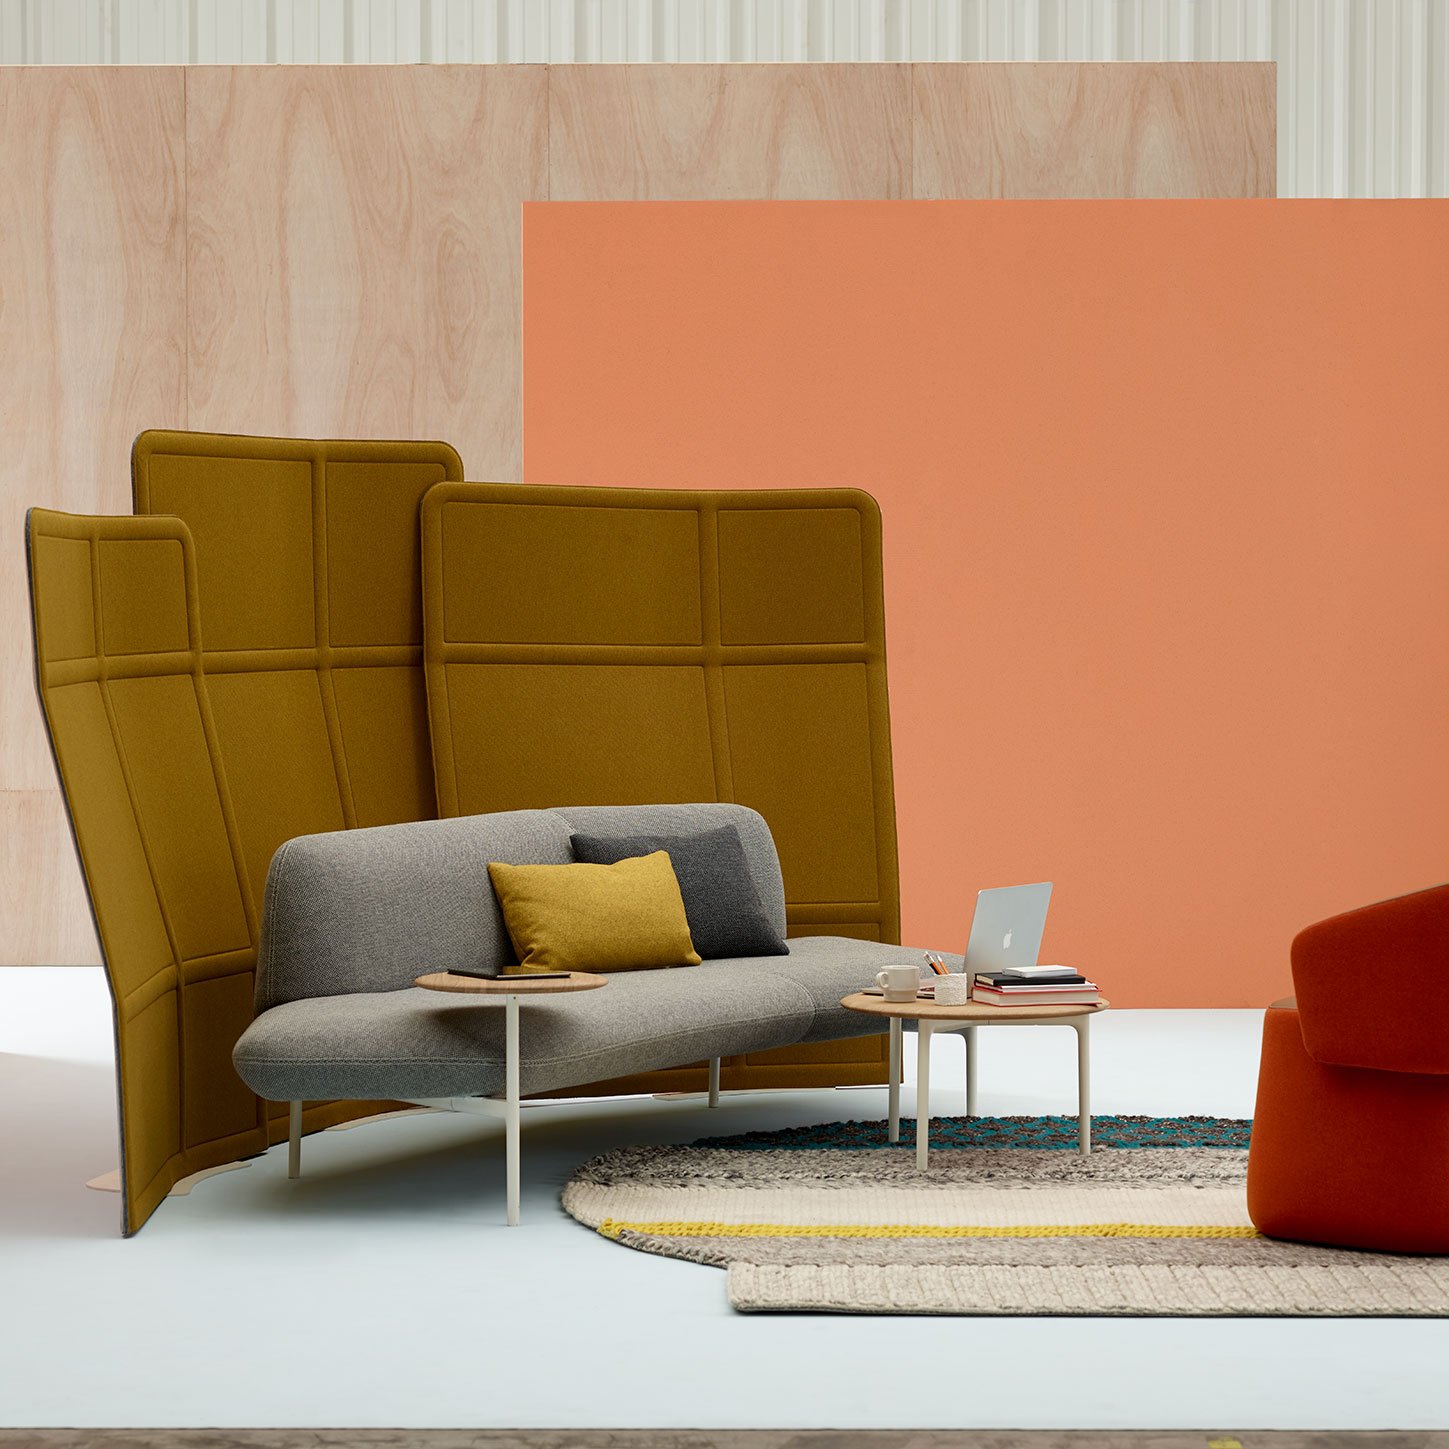 Haworth Openest Plume Screen in orange color over grey couch in open space